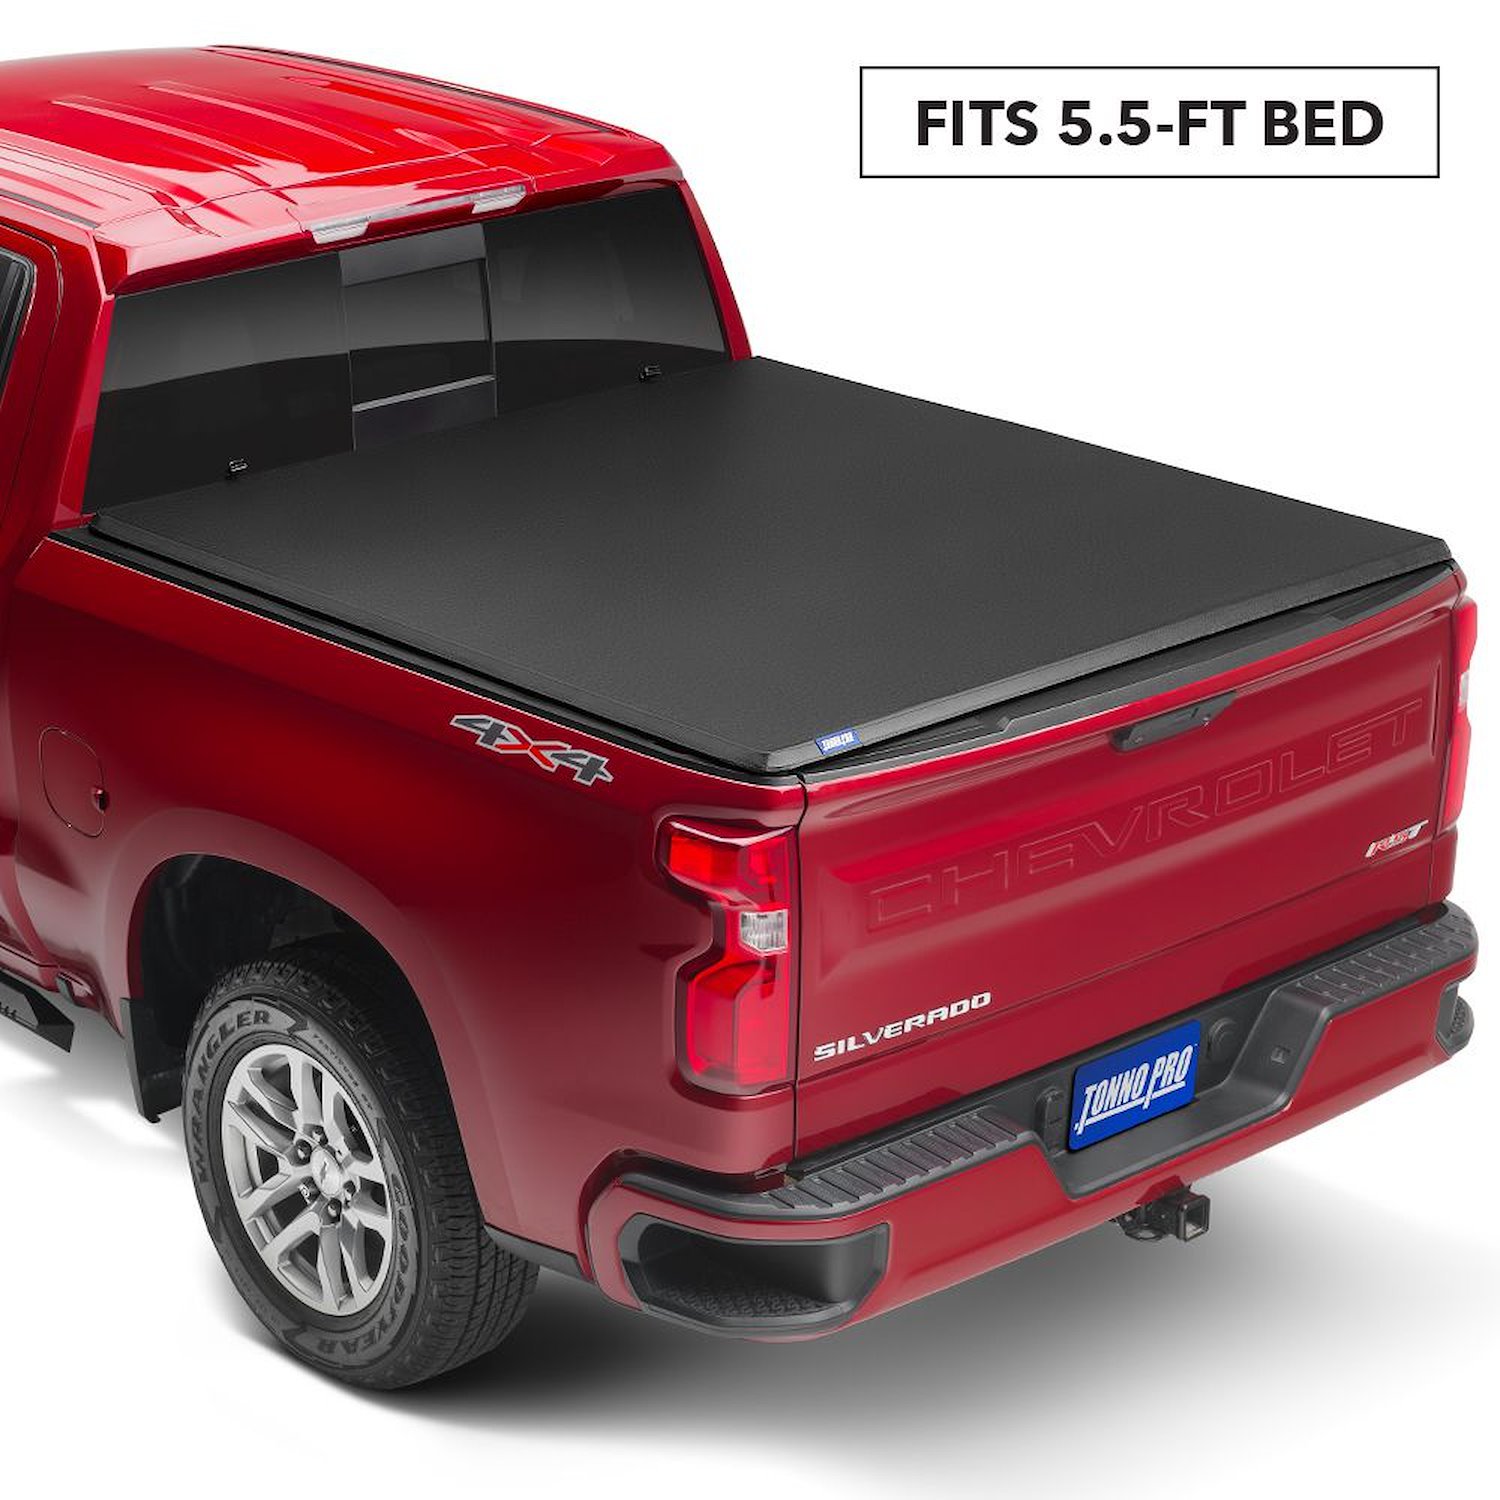 Soft Vinyl Trifold Tonneau Cover 2004-14 for Nissan Titan without Utility Track